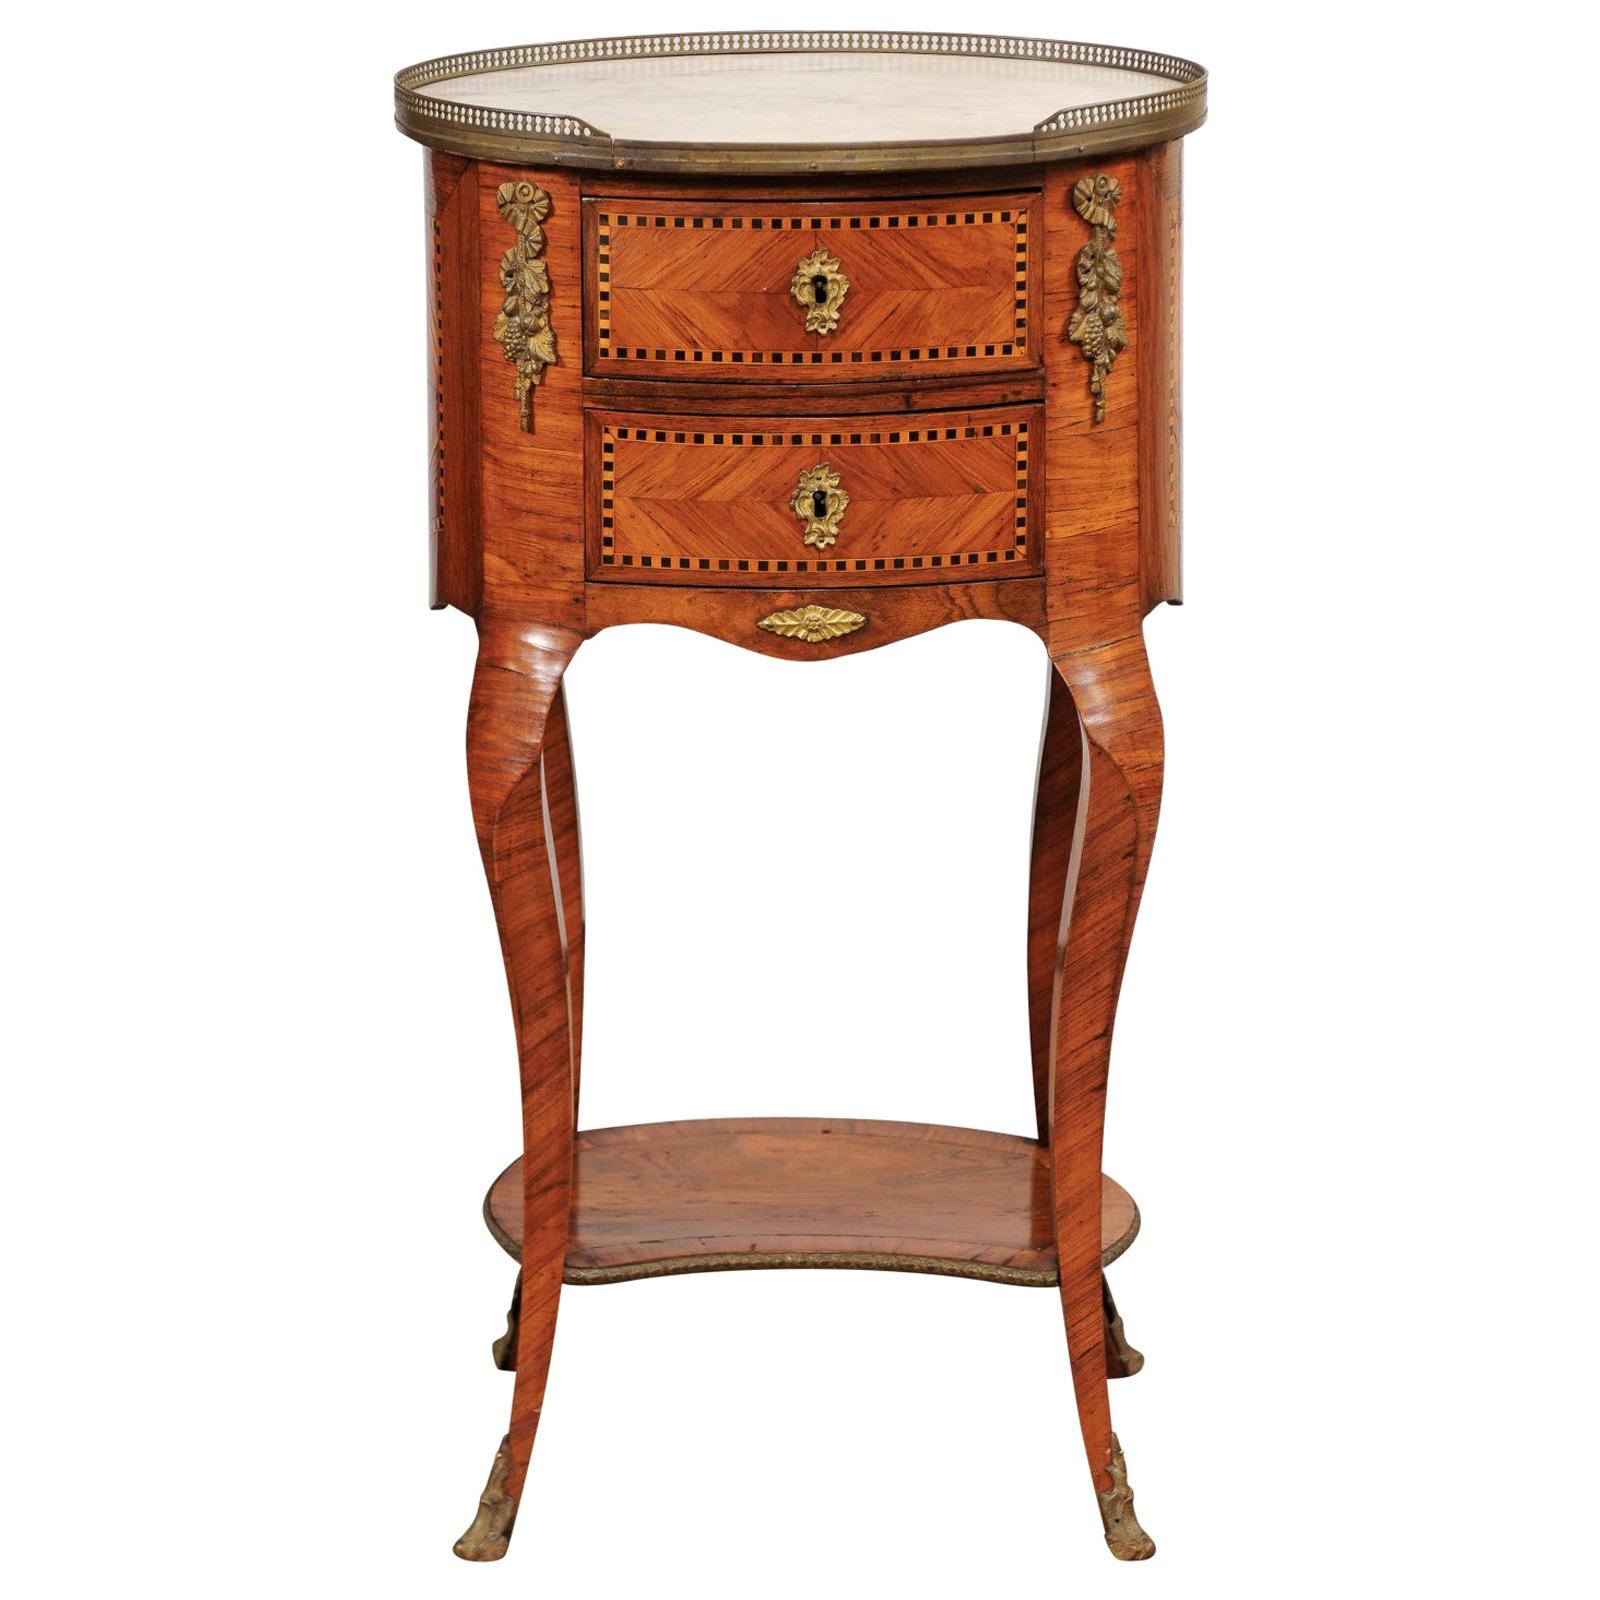 19th Century French Inlaid Tulipwood Chevet with Oval White Marble Top For Sale